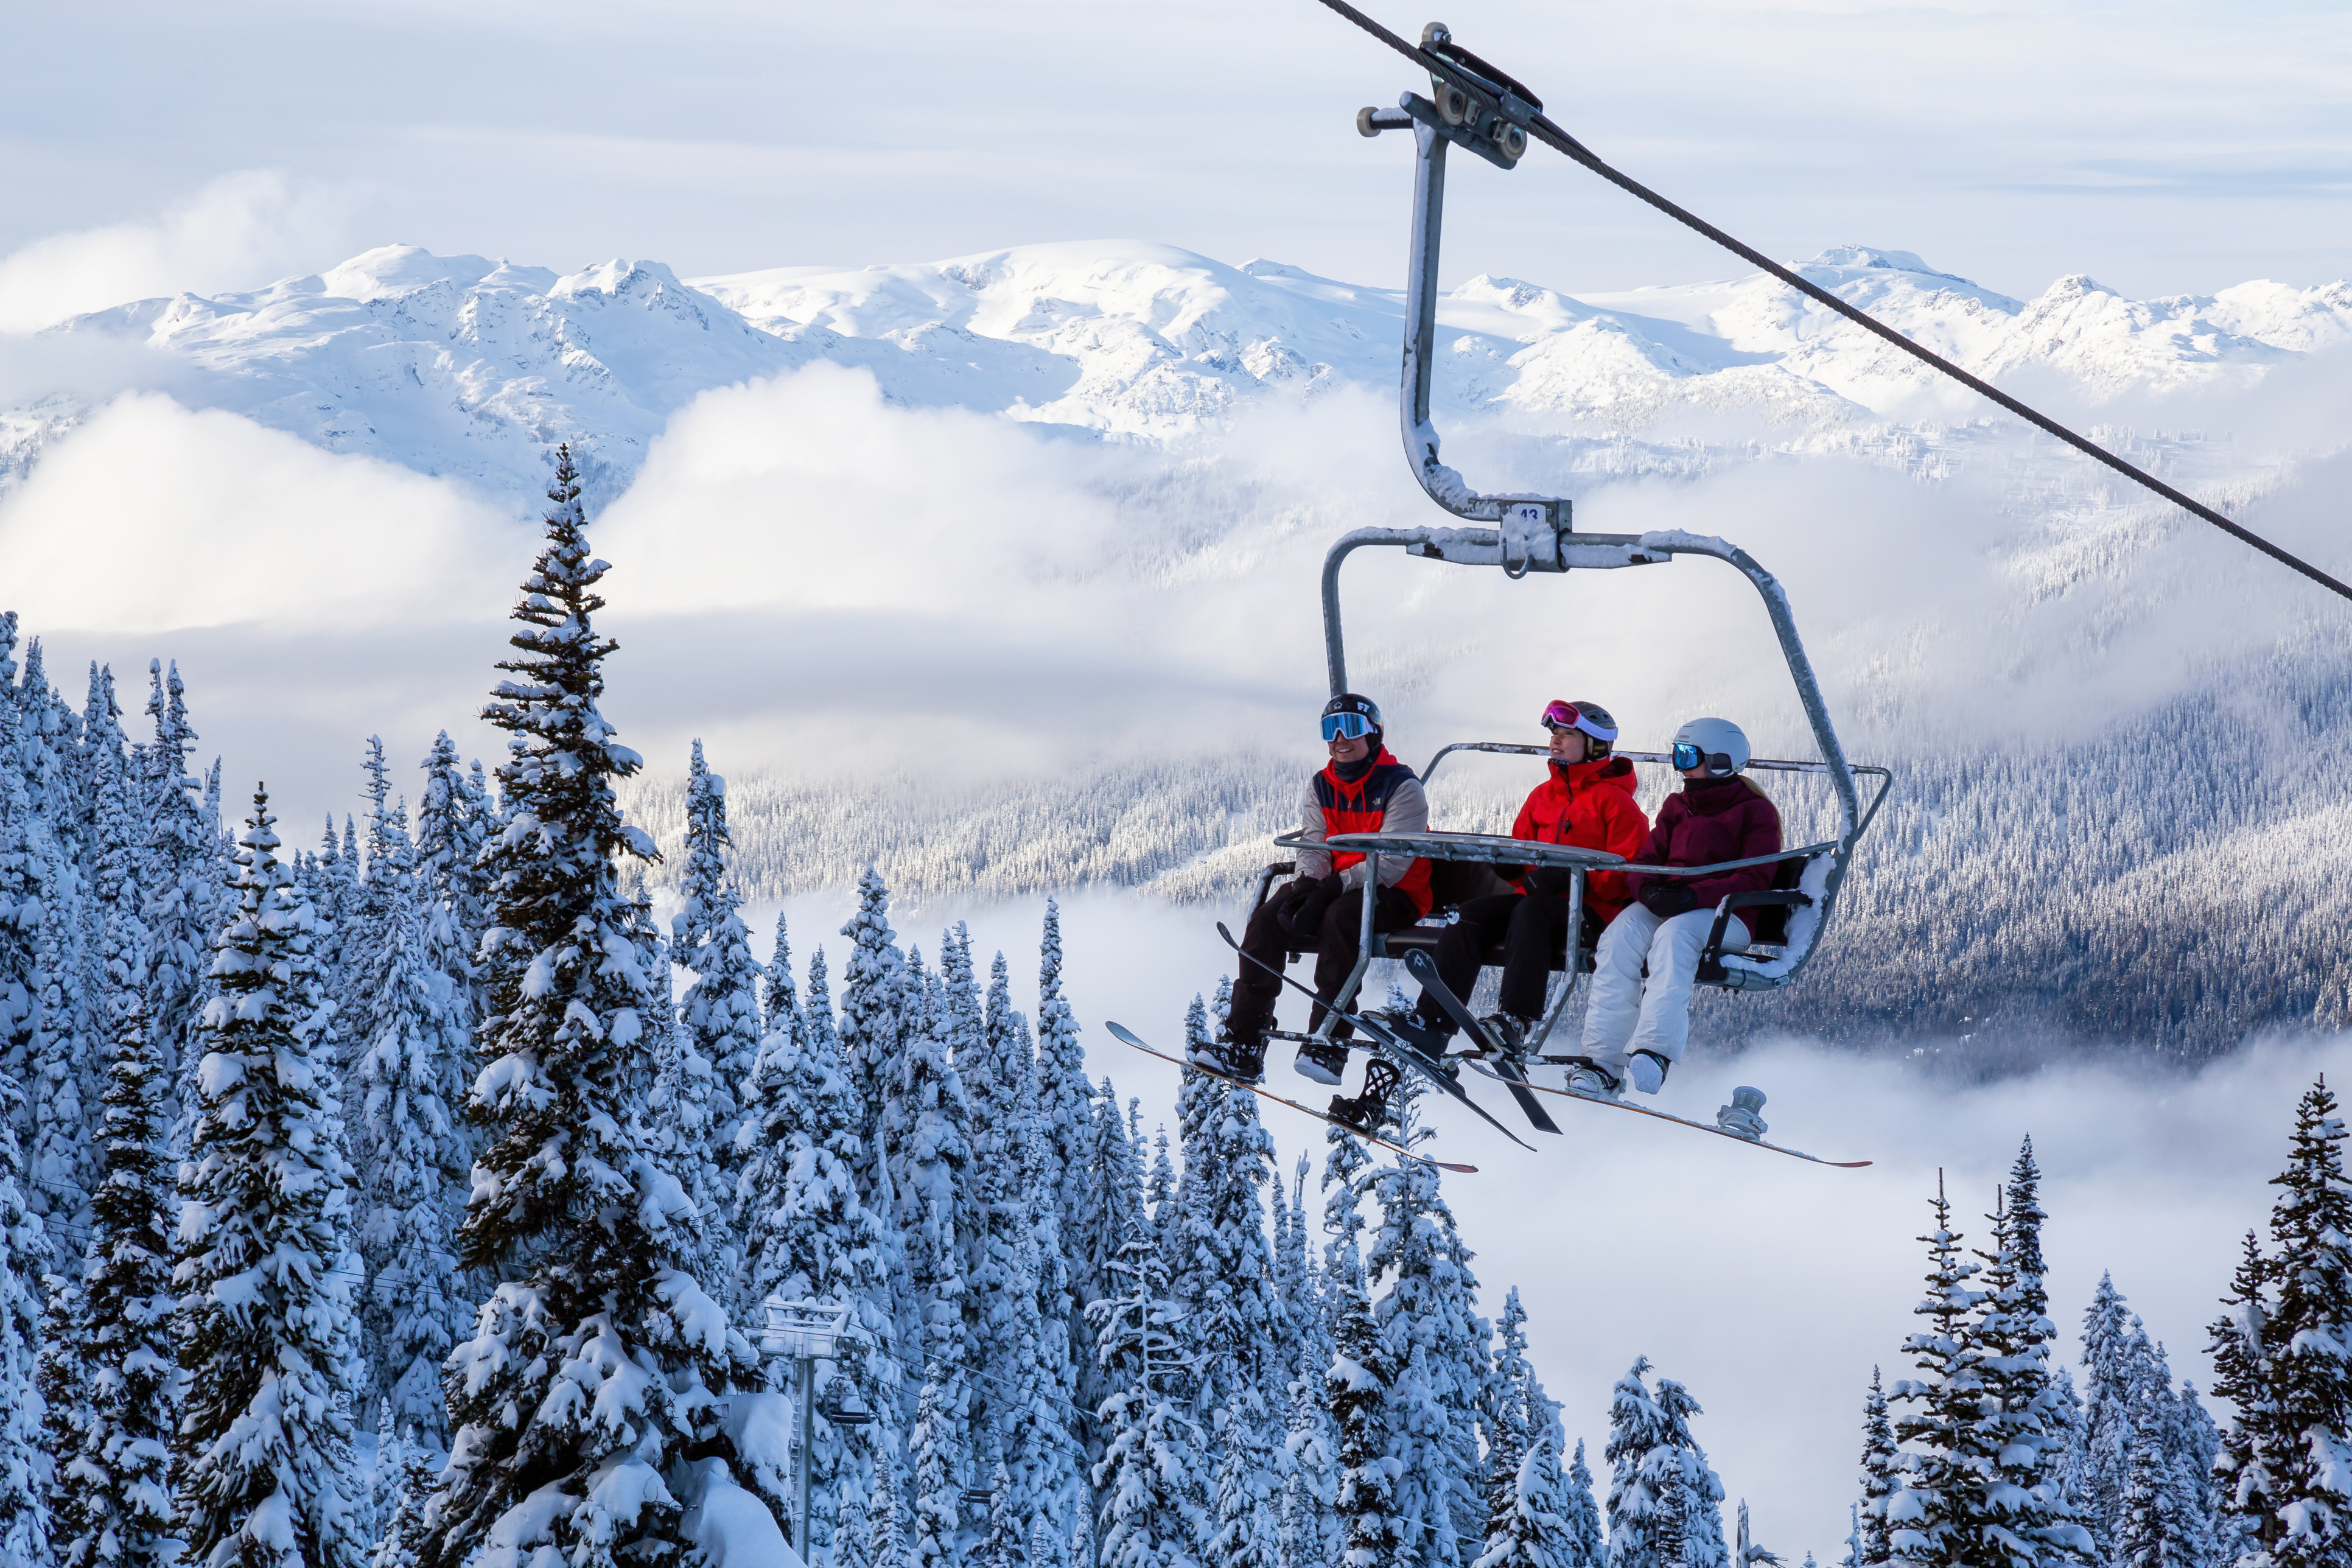 5 Reasons to Experience Whistler in the Wintertime